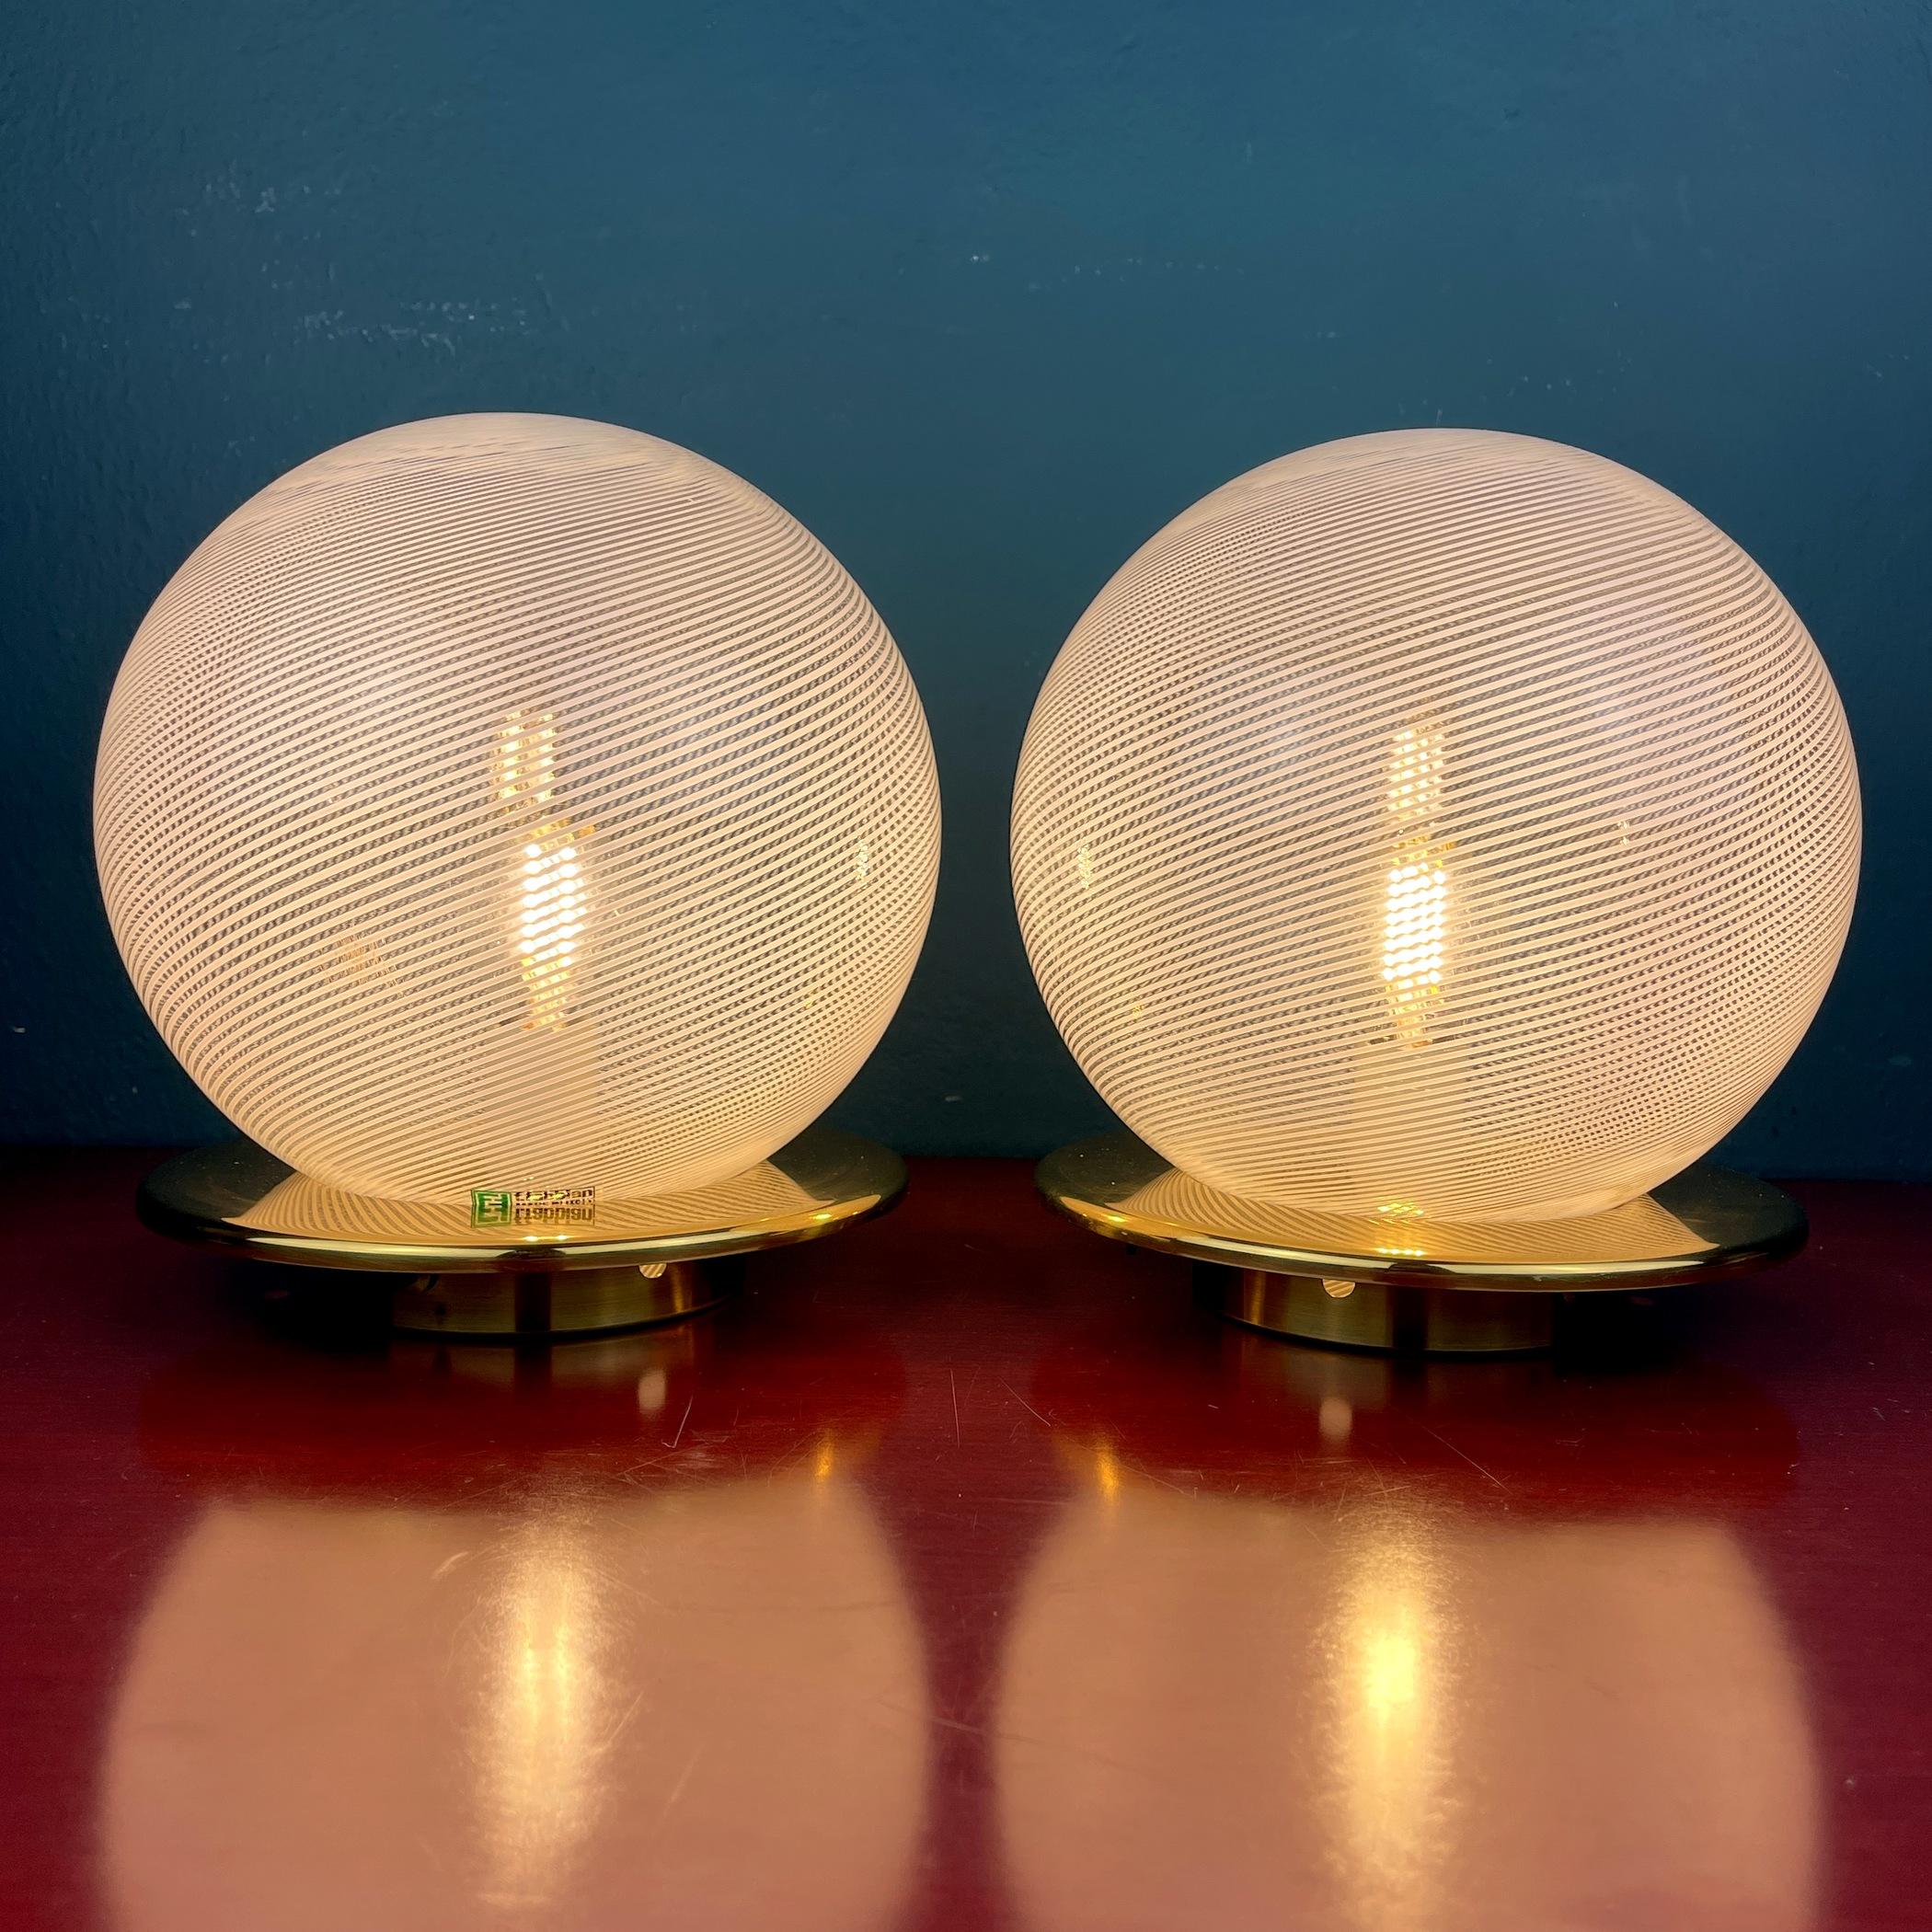 The pair of vintage Murano glass night table lamps were made in Italy in the 1970s. Very beautiful white glass with bends in the form of a sphere. Very good vintage condition. No chips or cracks. The metal has a patina. Requires a standard Edison